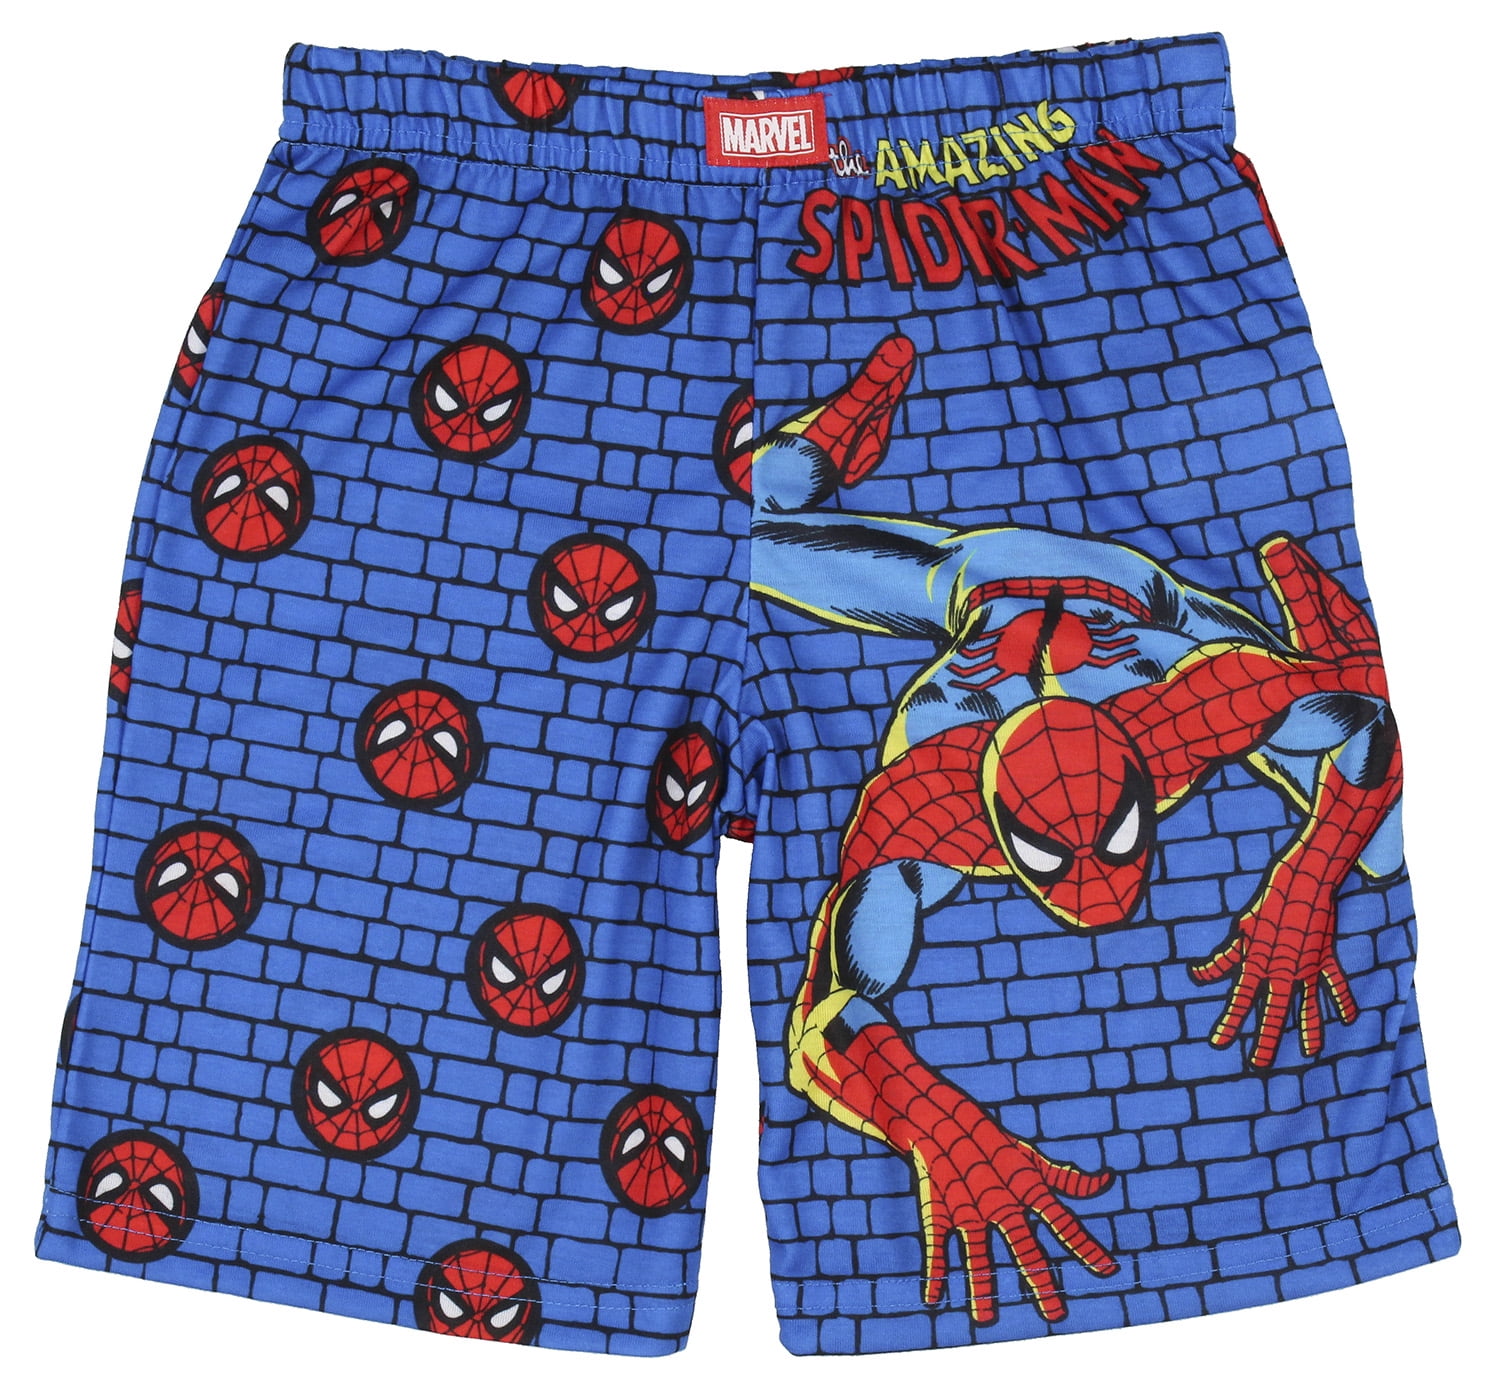 140 cms Ultimate Spiderman Boxer Shorts for Boys 9-10